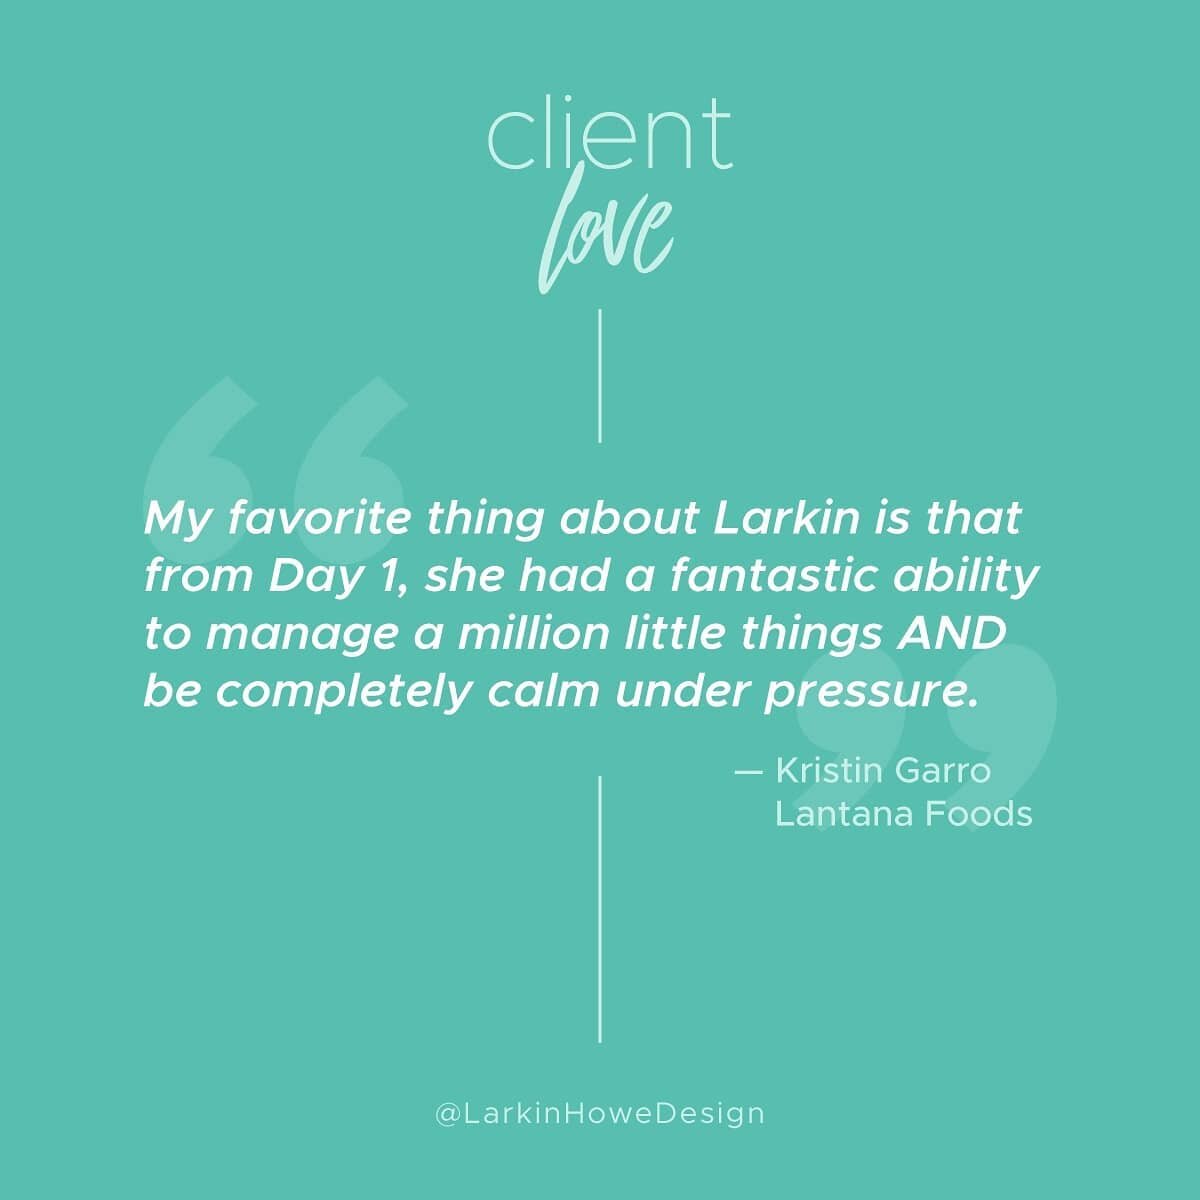 A little client love from my direct report at Lantana Foods 🥰 

I work hard for my clients, not just in hopes that it shows and that they recommend me, but because that's what is right. I put my clients first in my work so that I can point proudly t